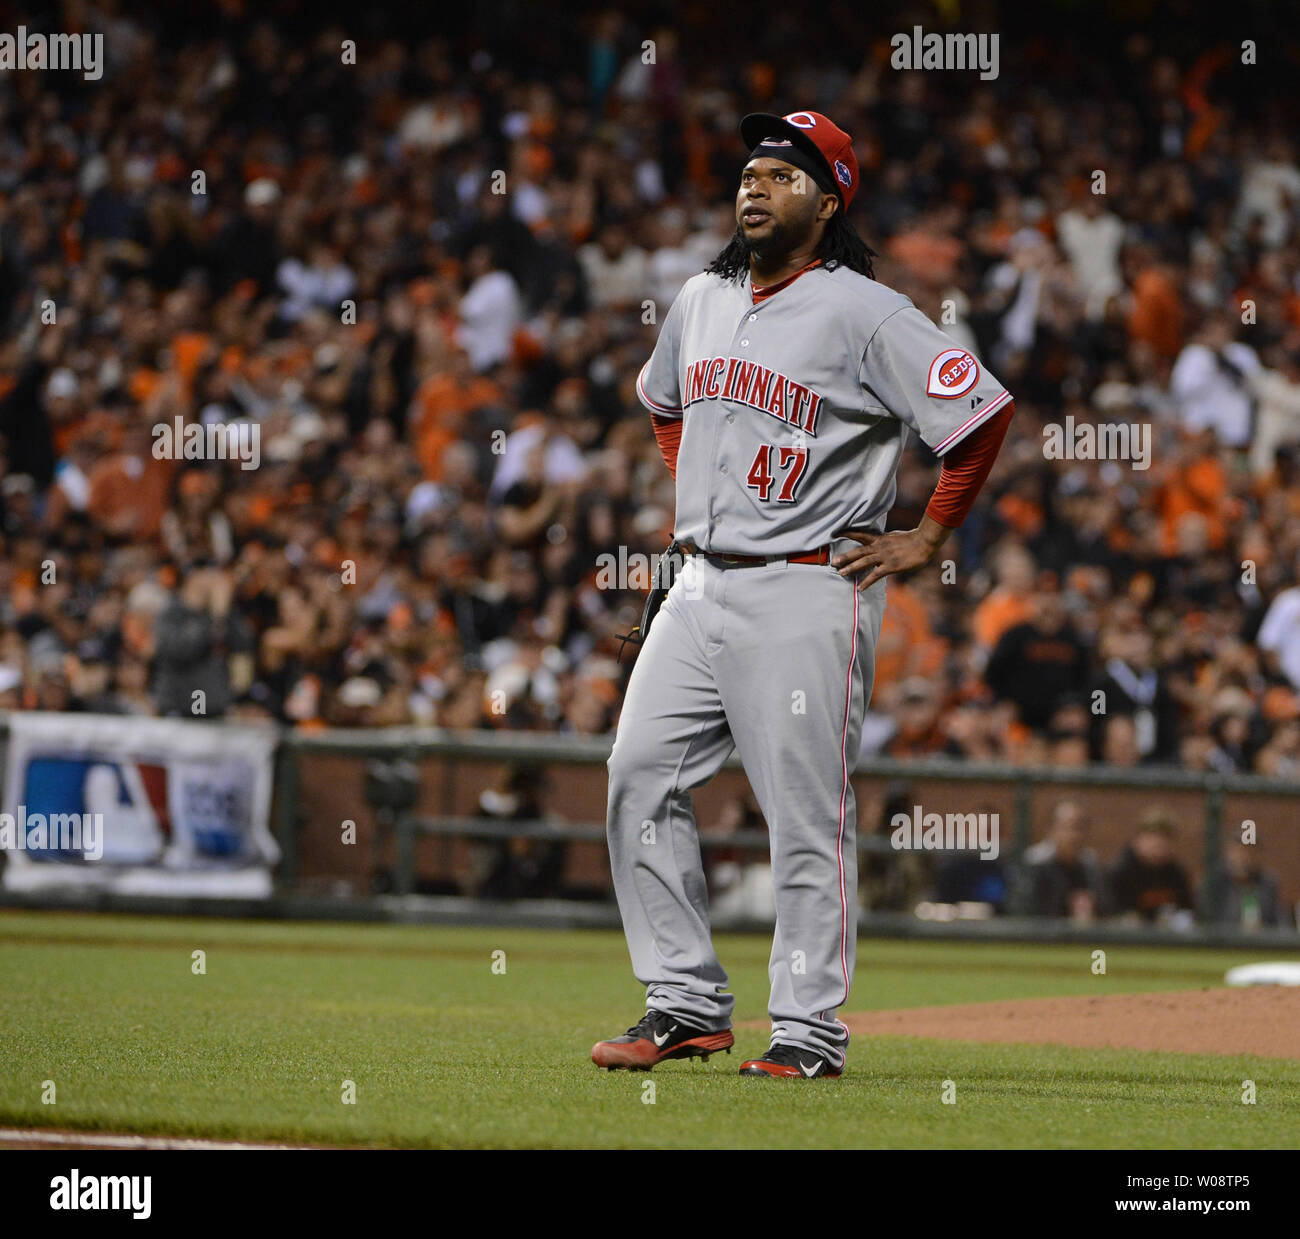 Cincinnati Reds starting pitcherJohnny Cueto leaves the game with an injury in the first inning against the San Francisco Giants in the National League Divisional Series at AT&T Park in San Francisco on October 6, 2012.   UPI/Terry Schmitt Stock Photo